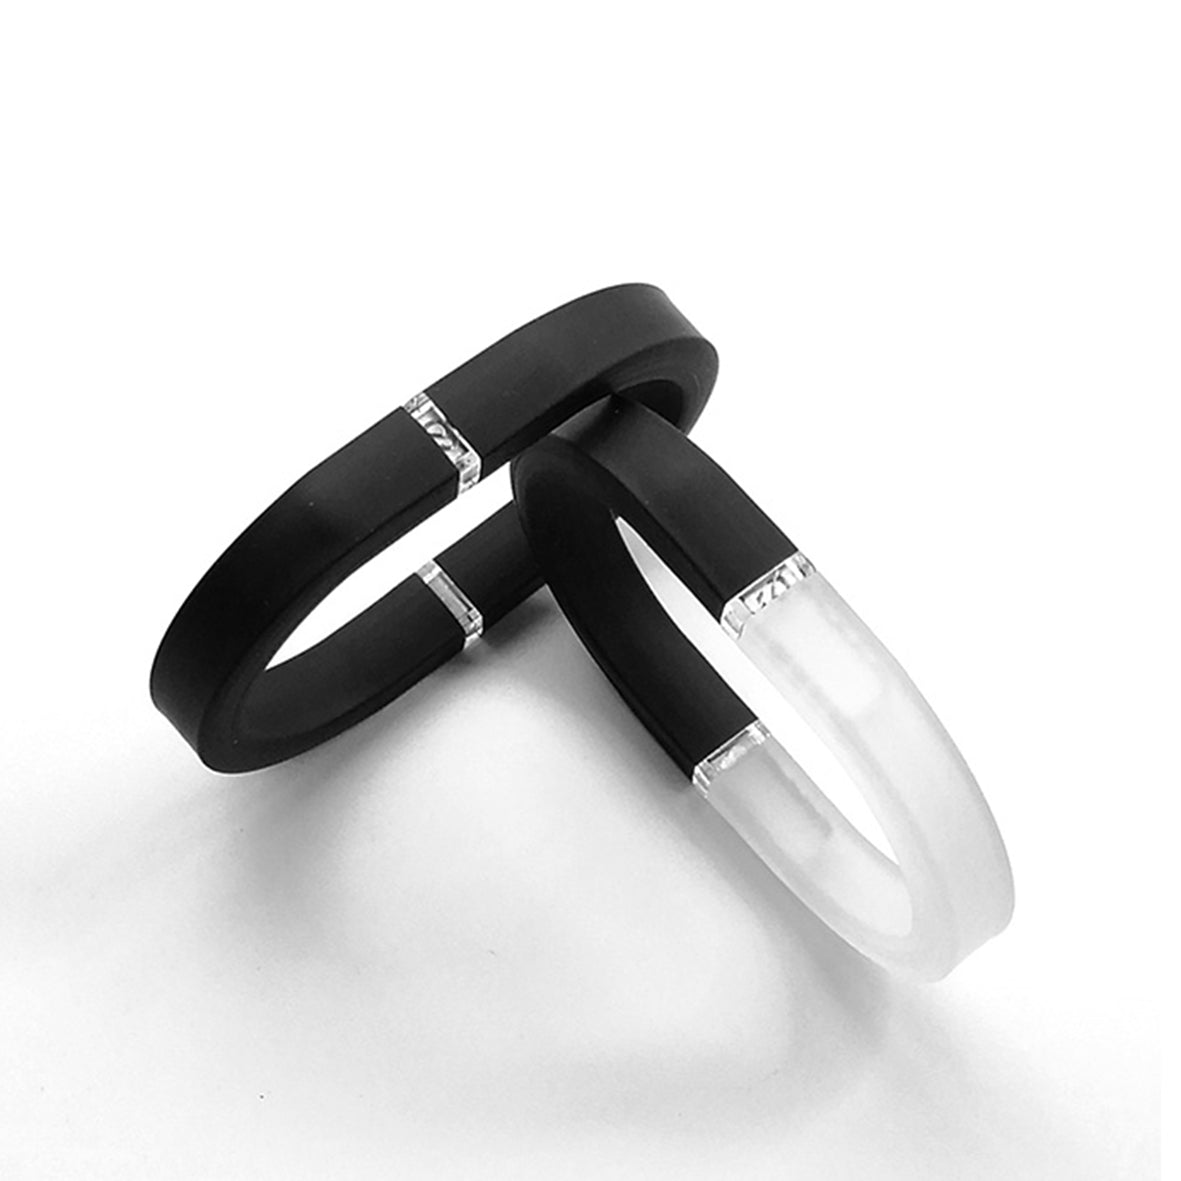 Delta Duo set of 2 rubber bracelets Black and White